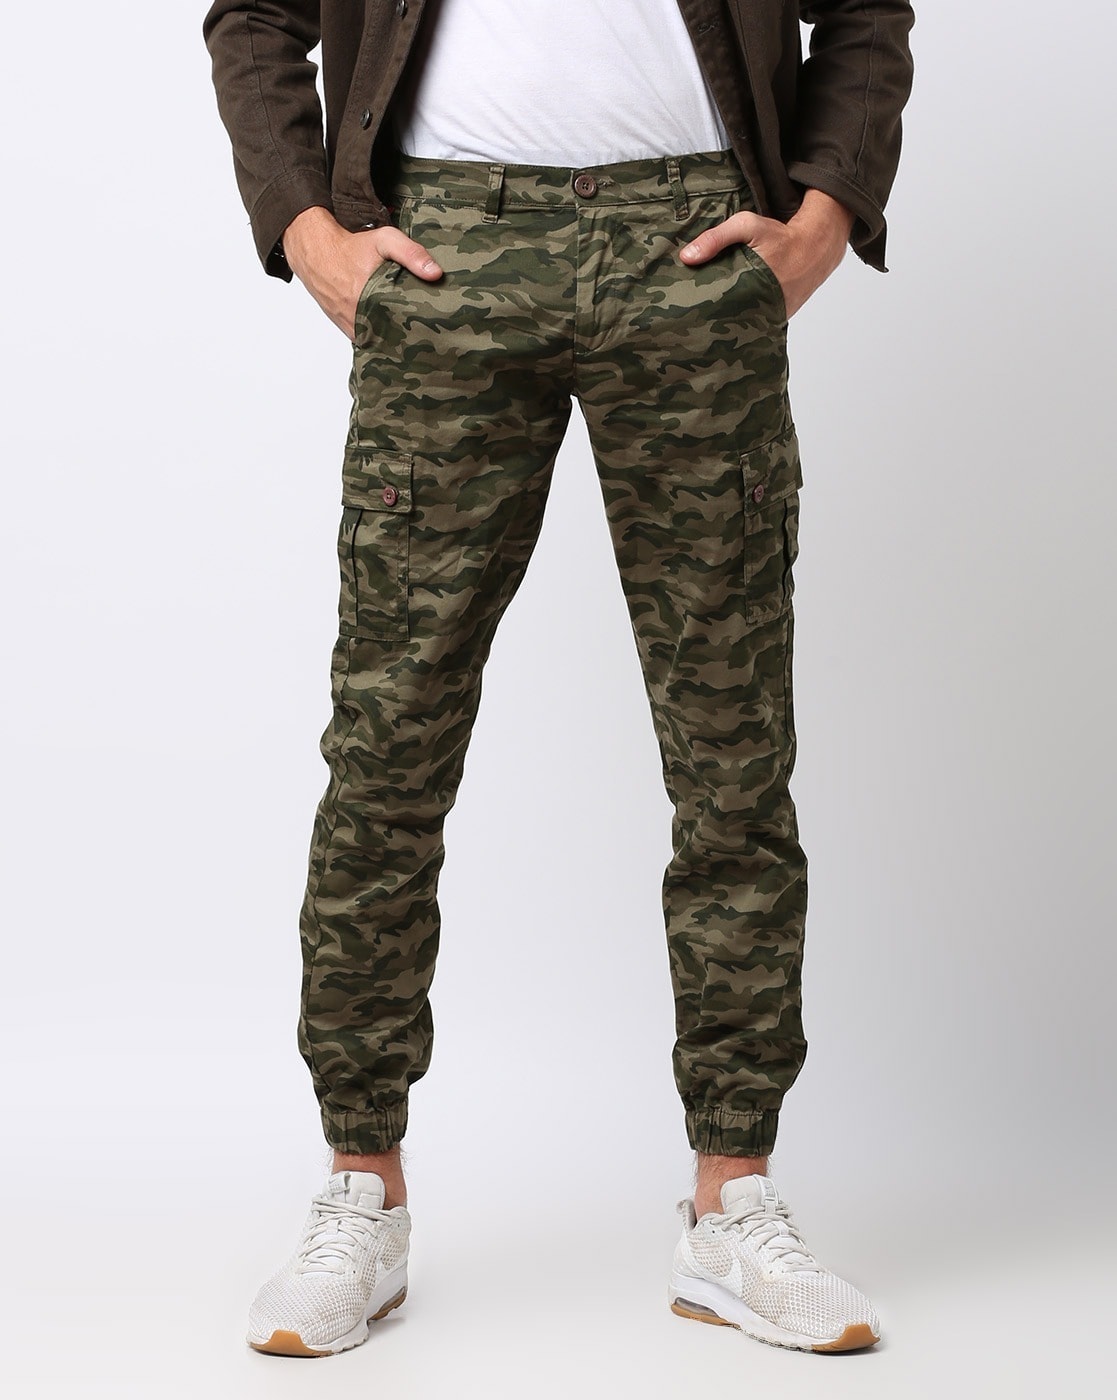 Camouflage Cargo & Army Pants - Buy Camouflage Cargo & Army Pants online in  India